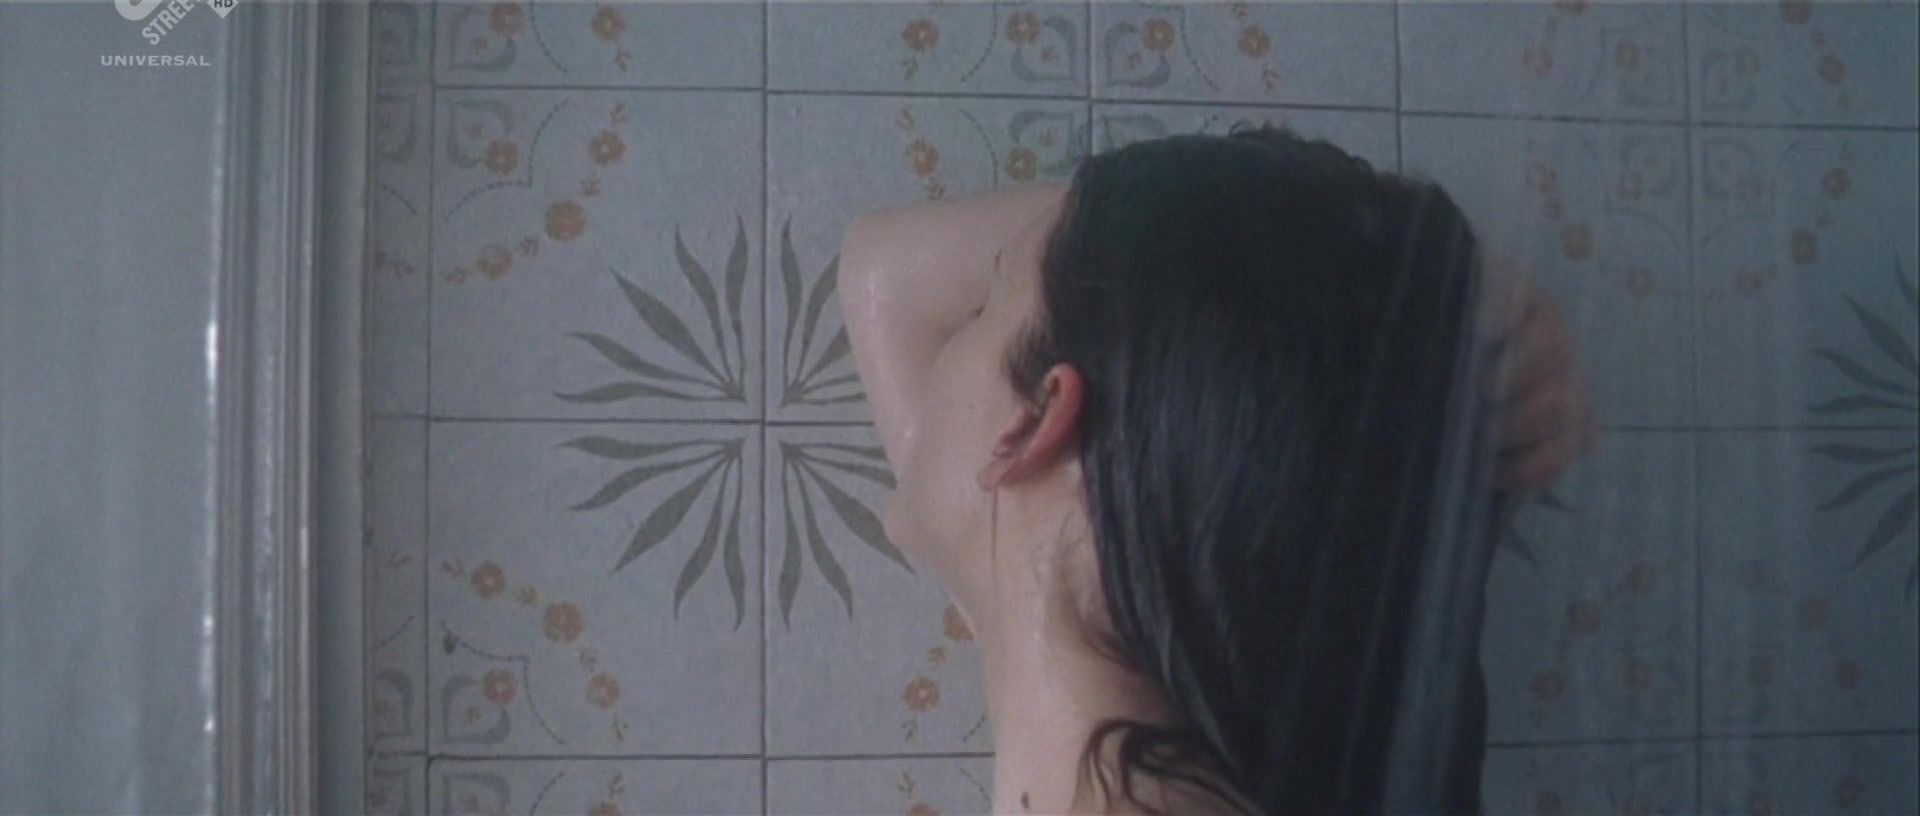 GreekSex Topless Melanie Laurent from Shower Video of the French movie "La chambre des morts" ThisVidScat